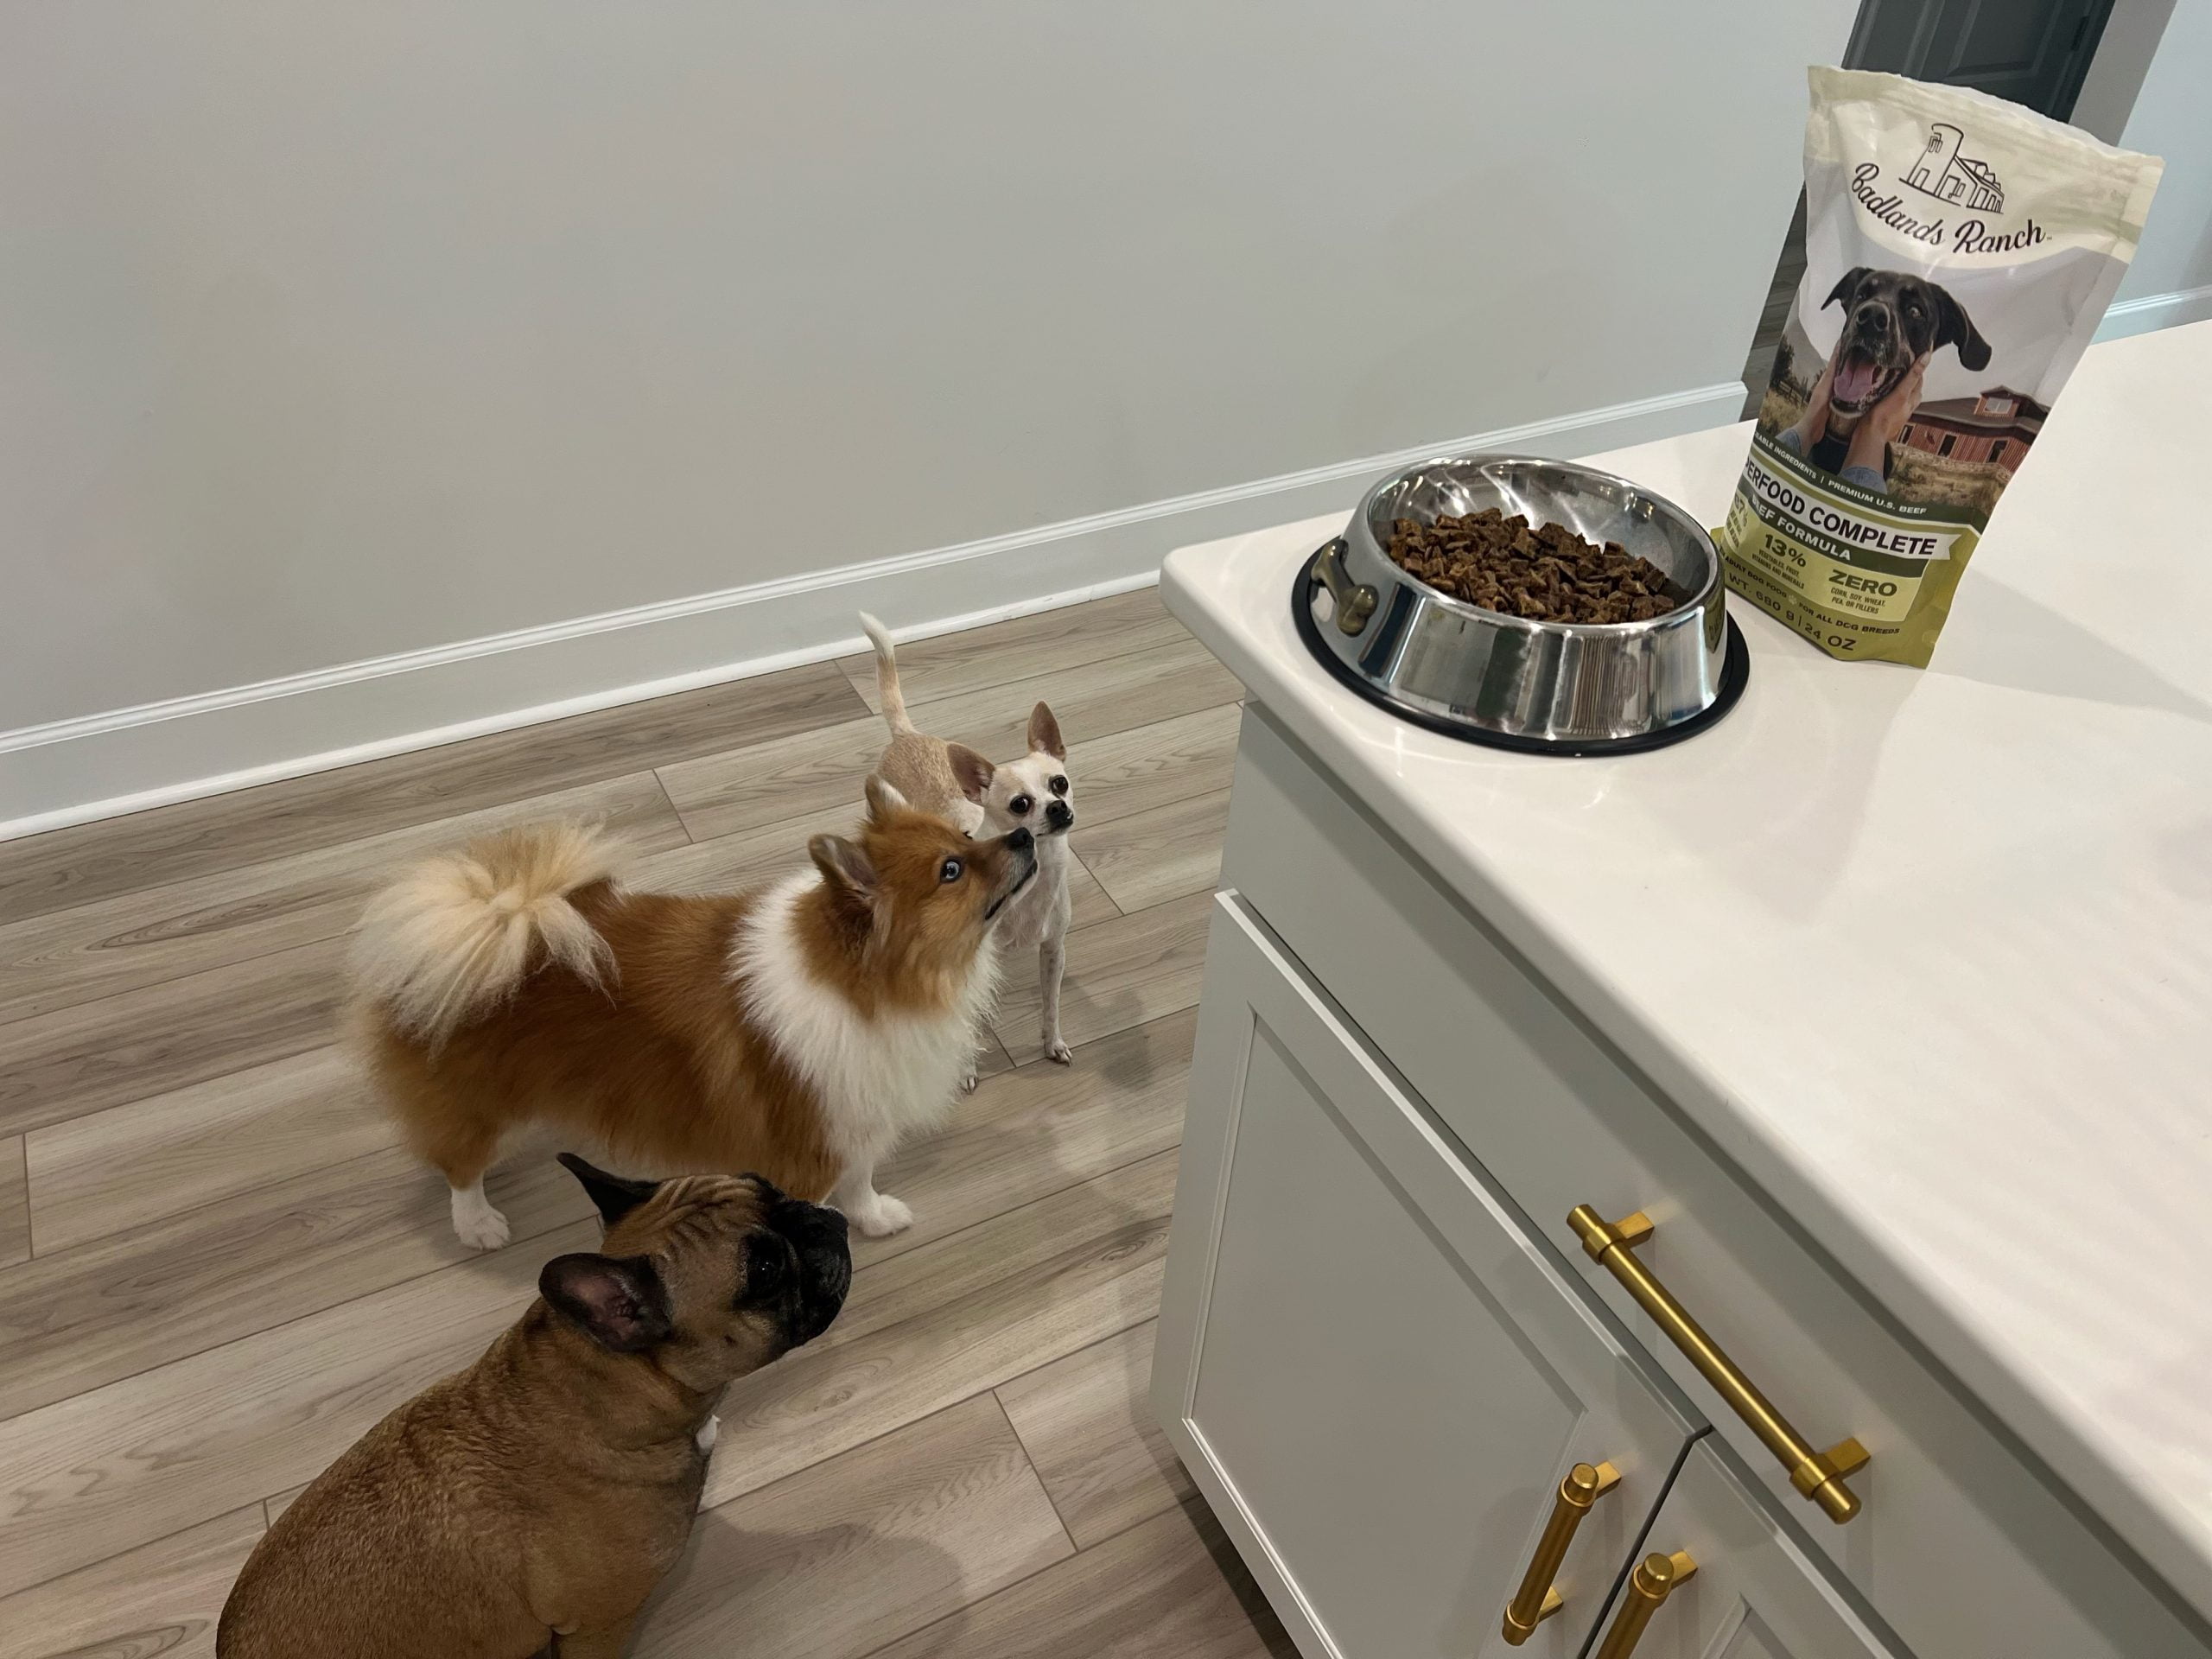 Our dogs waiting to eat Superfood Complete dog food